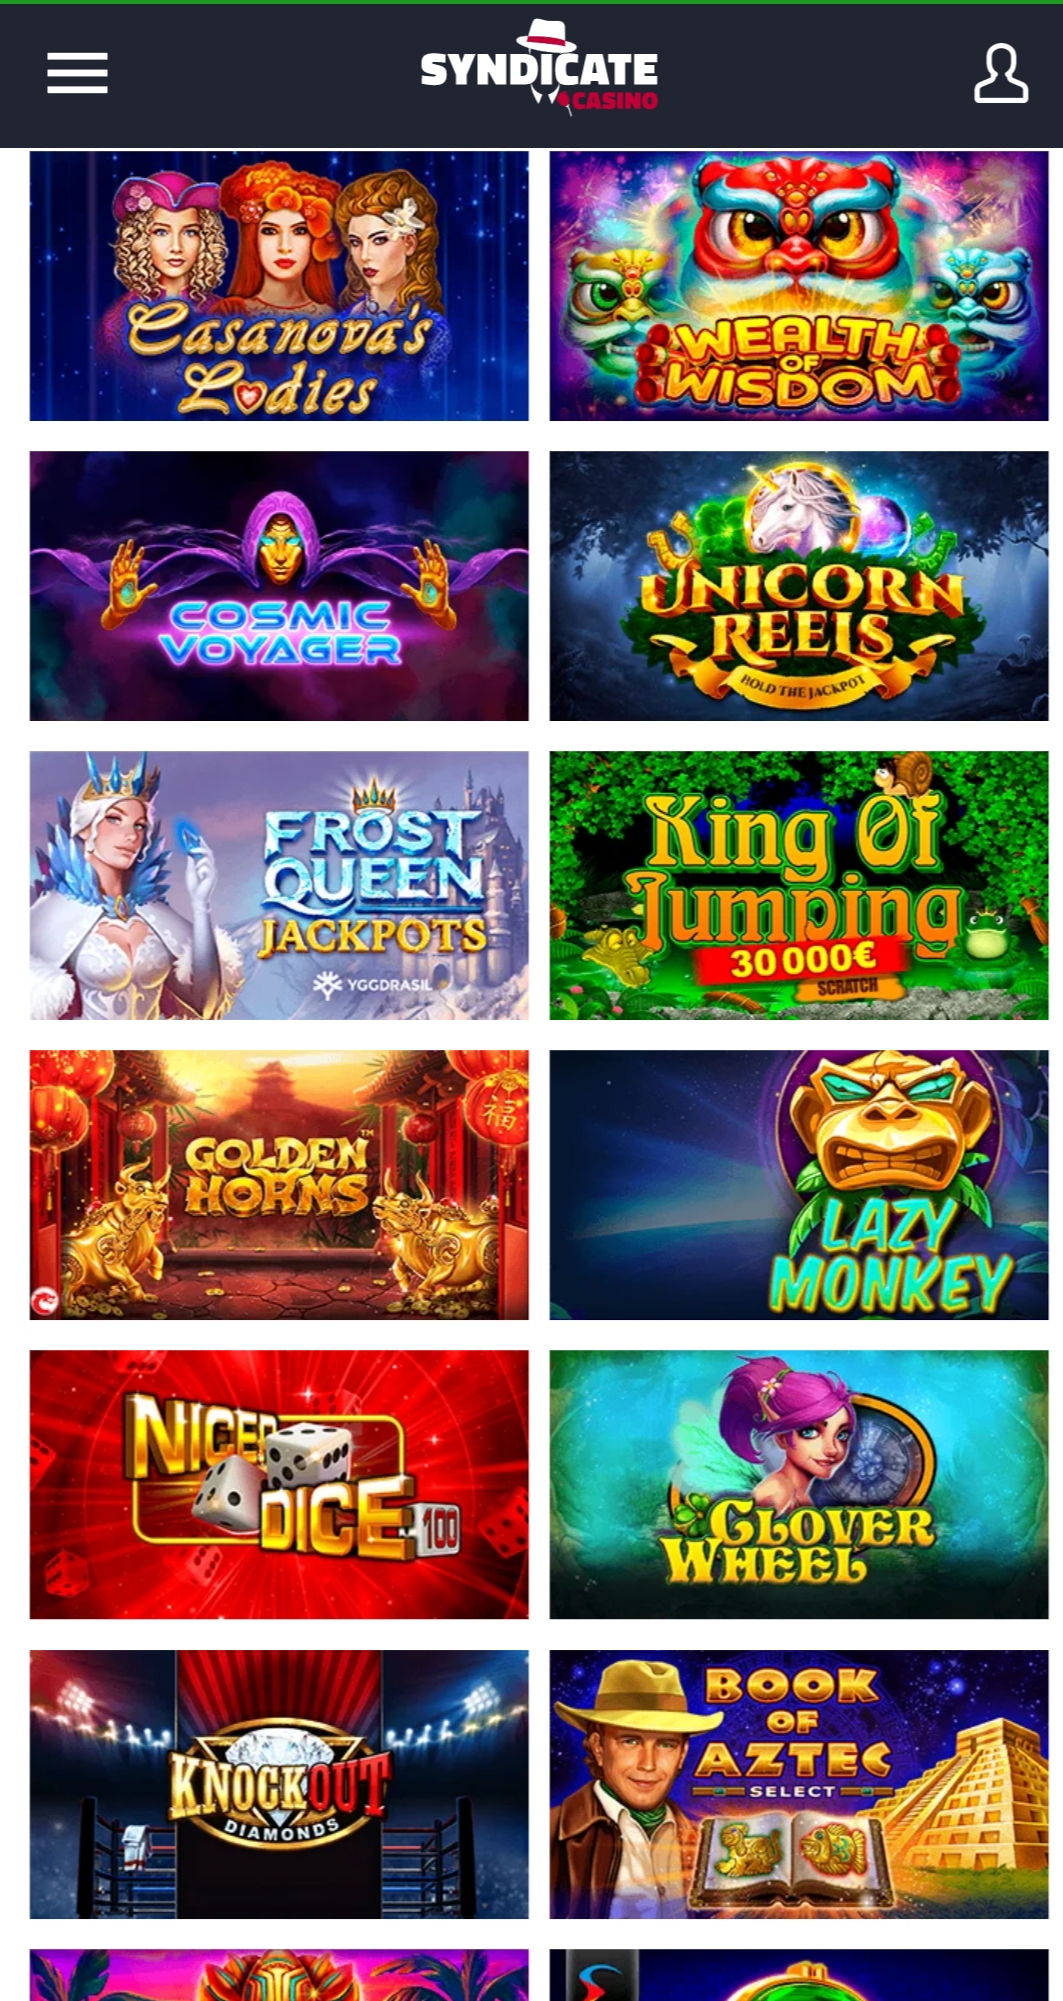 Syndicate Casino Mobile Review